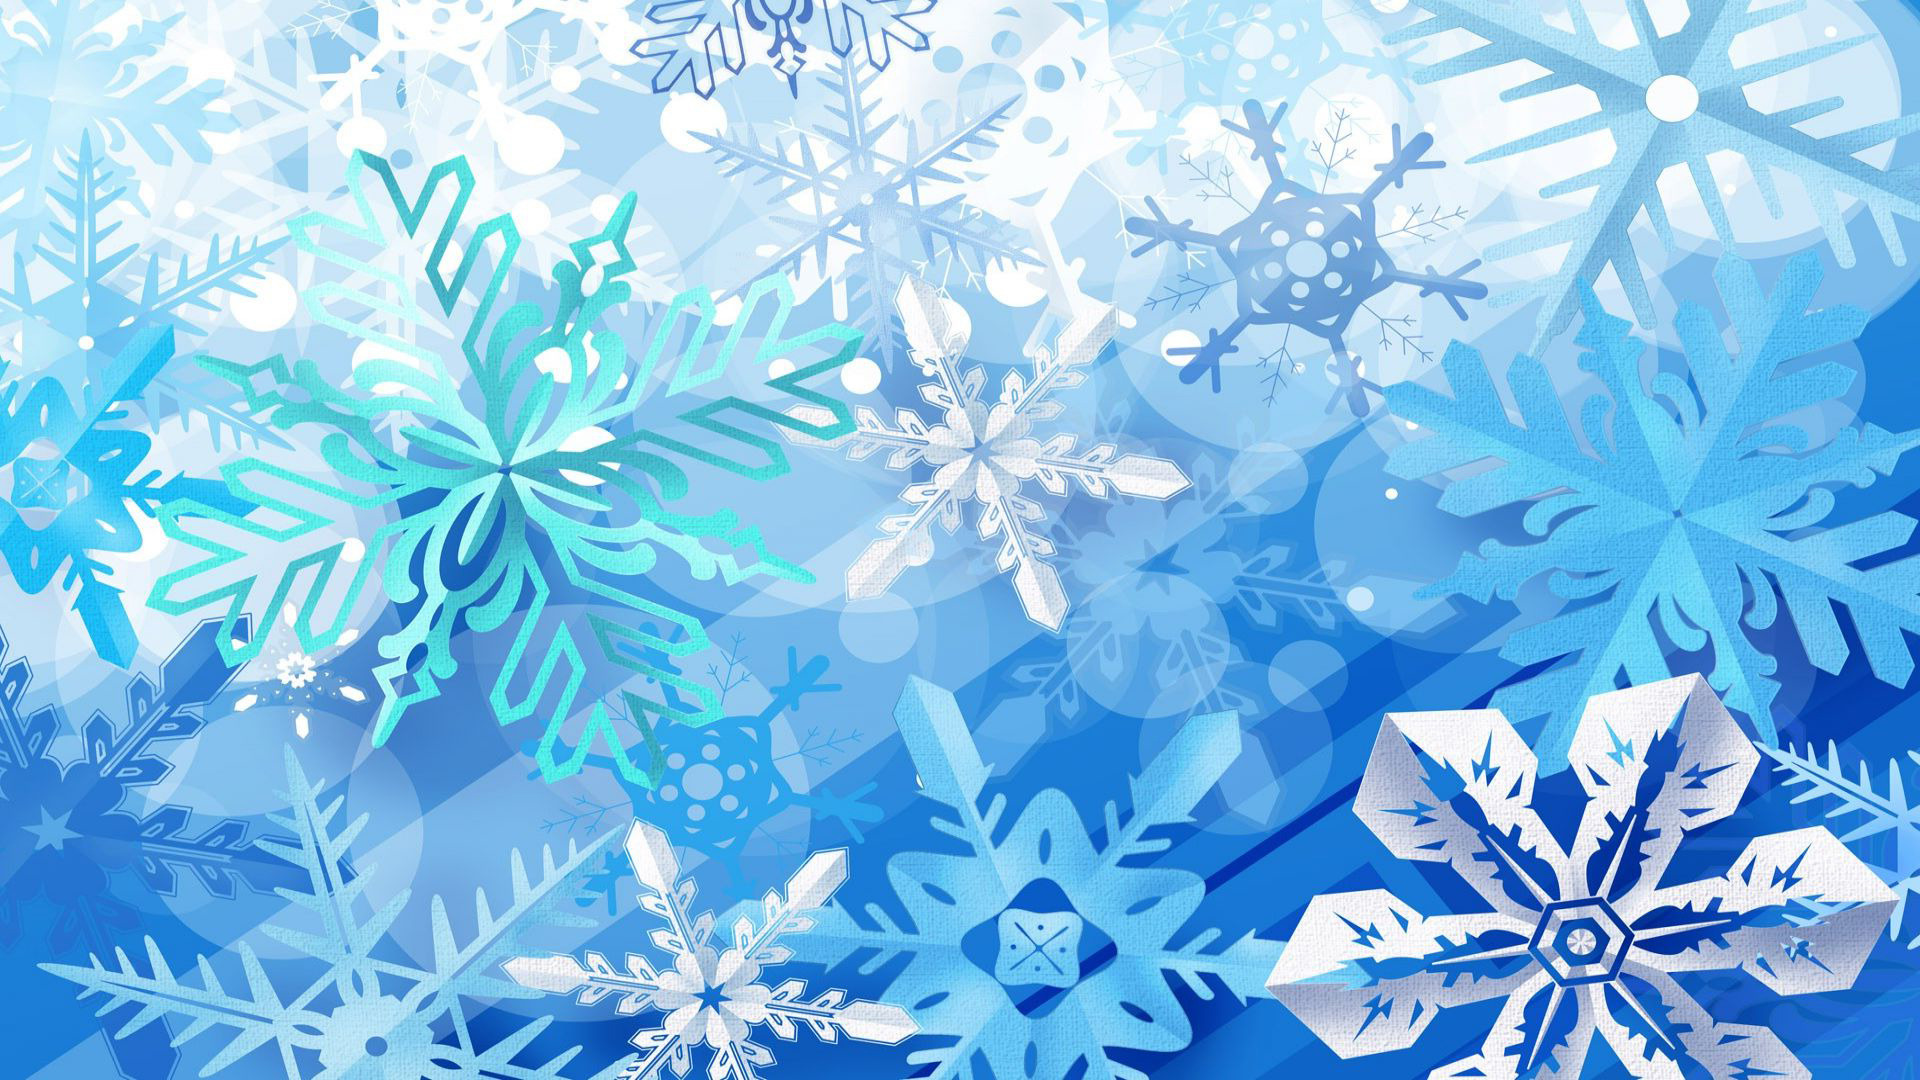 Snow Background Wallpaper High Definition Quality